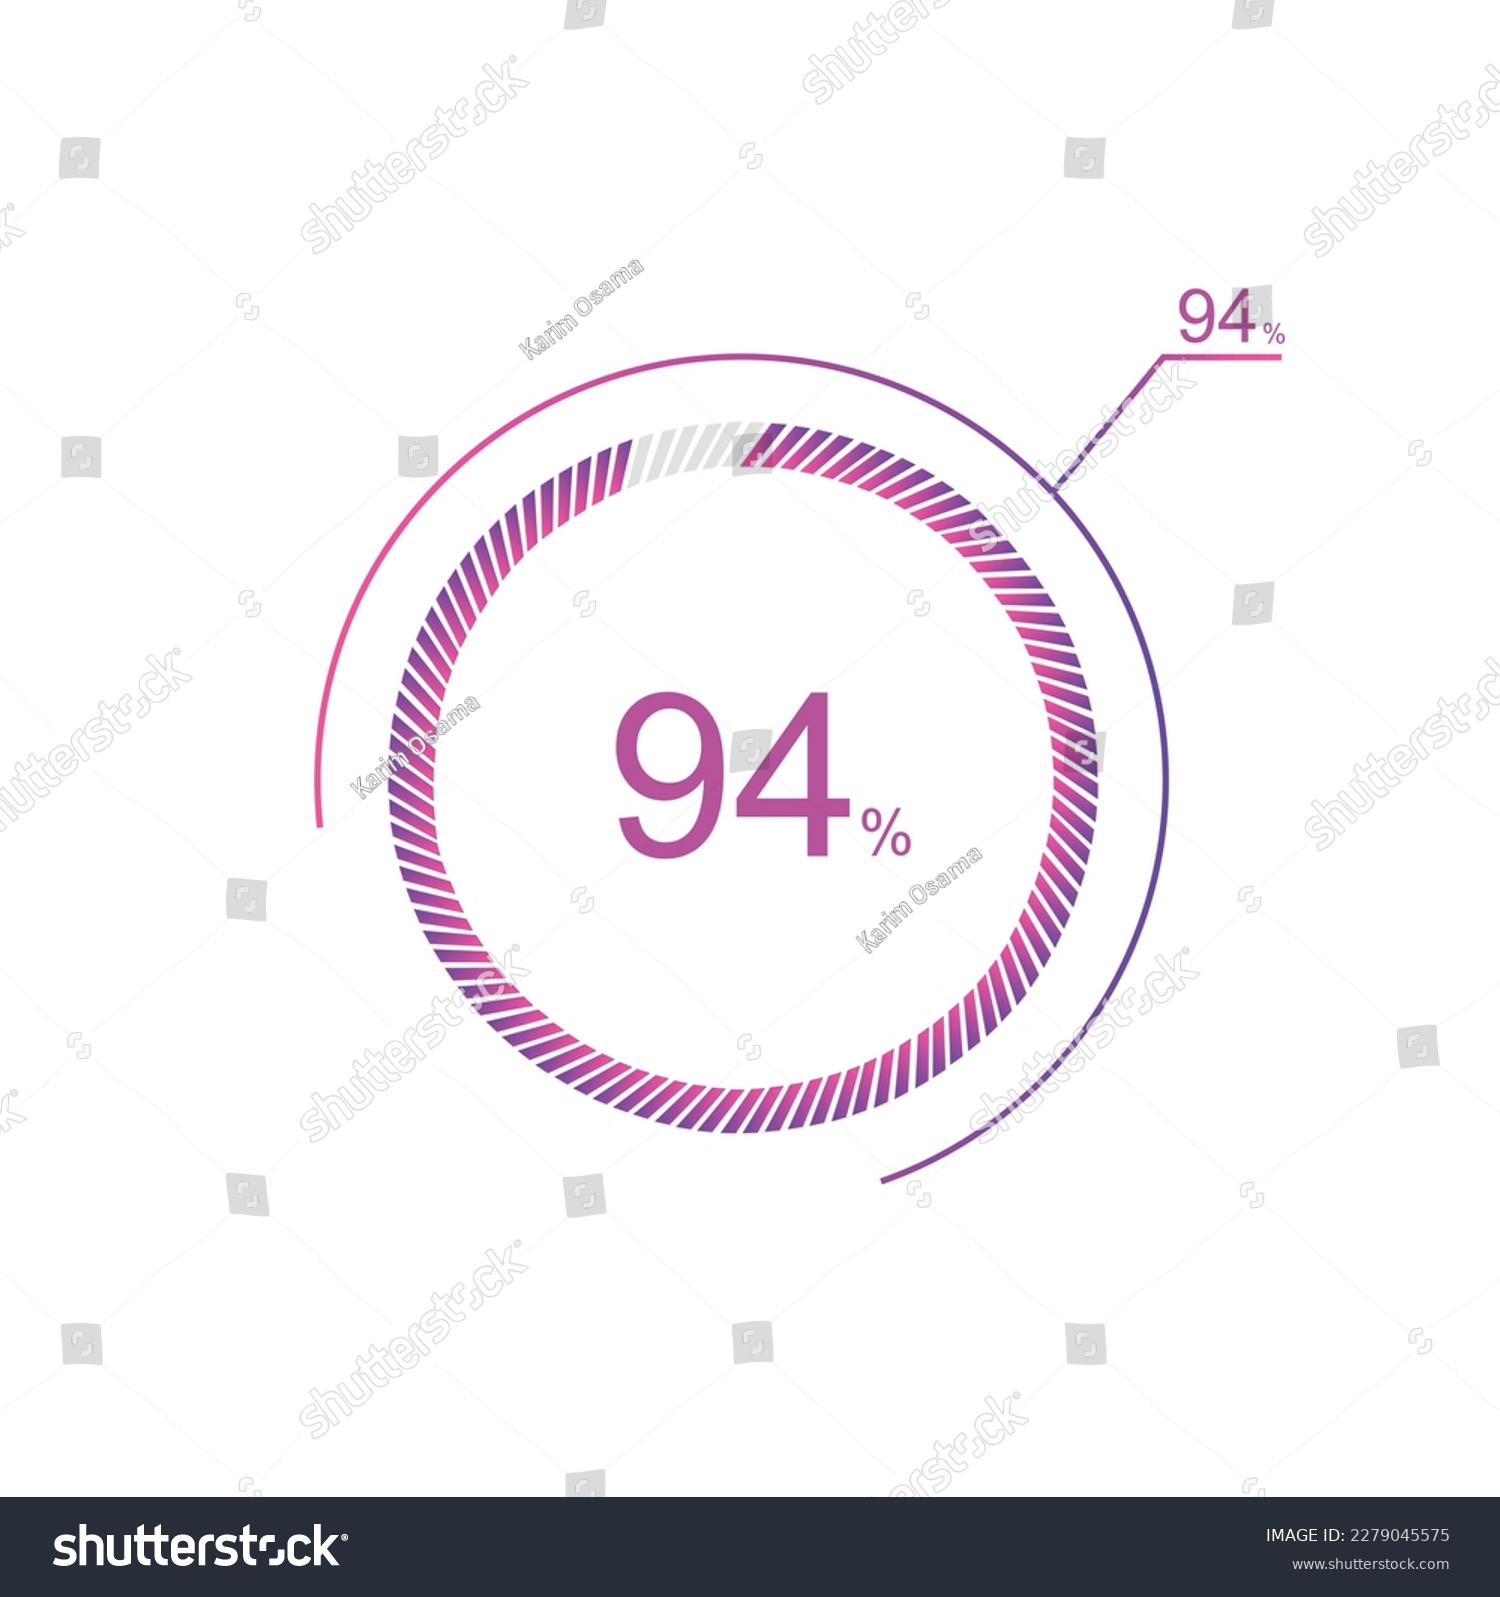 SVG of 94% percent circle chart symbol. 94 percentage Icons for business, finance, report, downloading. svg